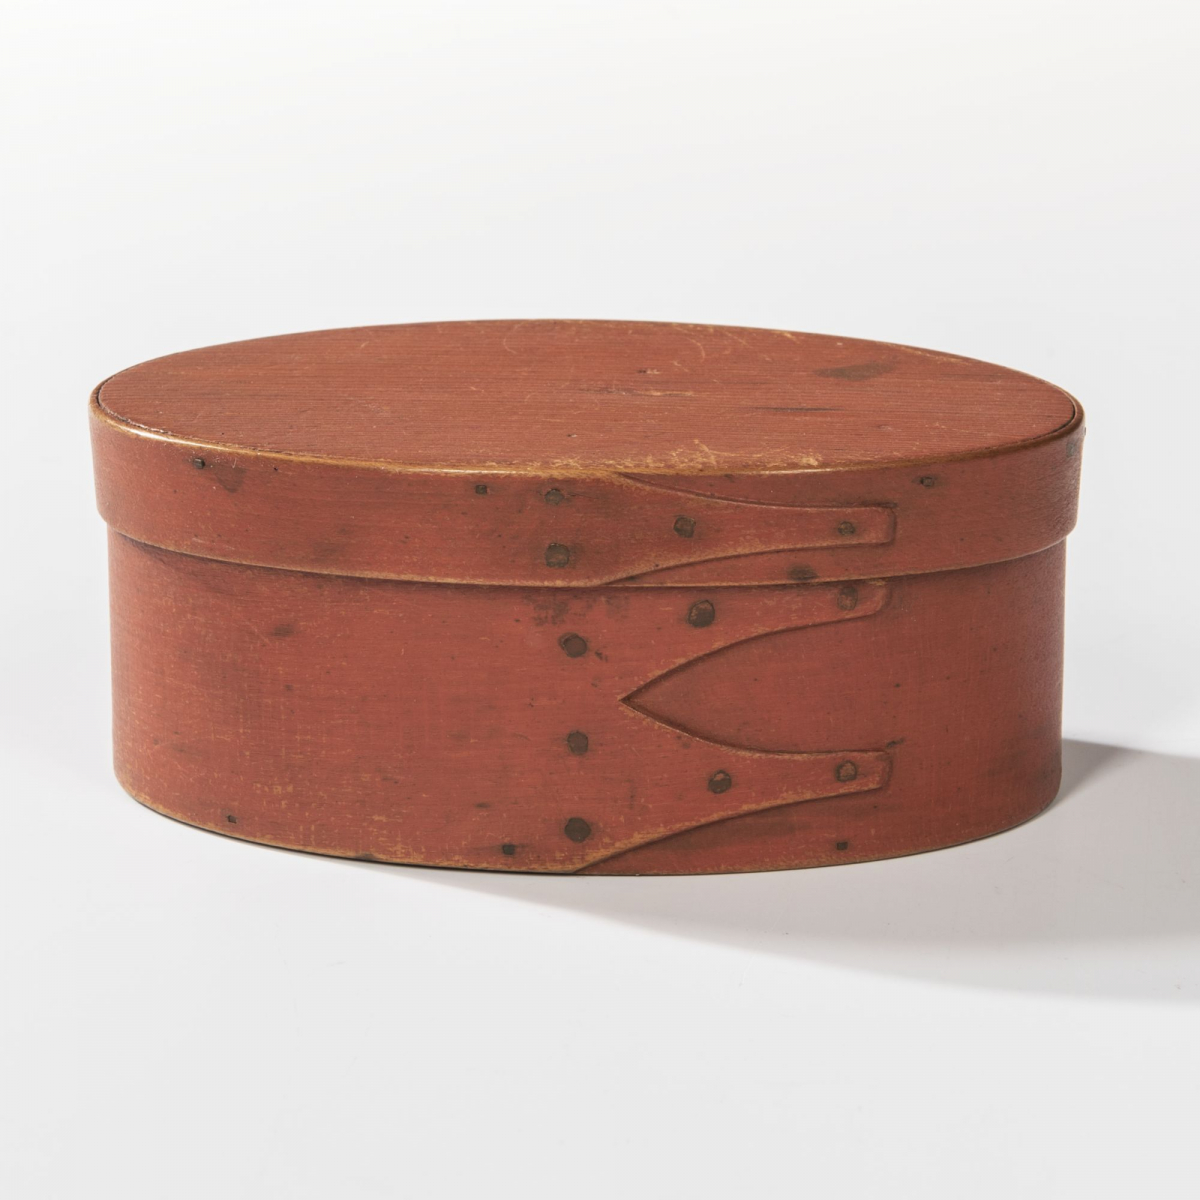 Shaker Bittersweet-painted Three-finger Oval Pantry Box, c. 1840